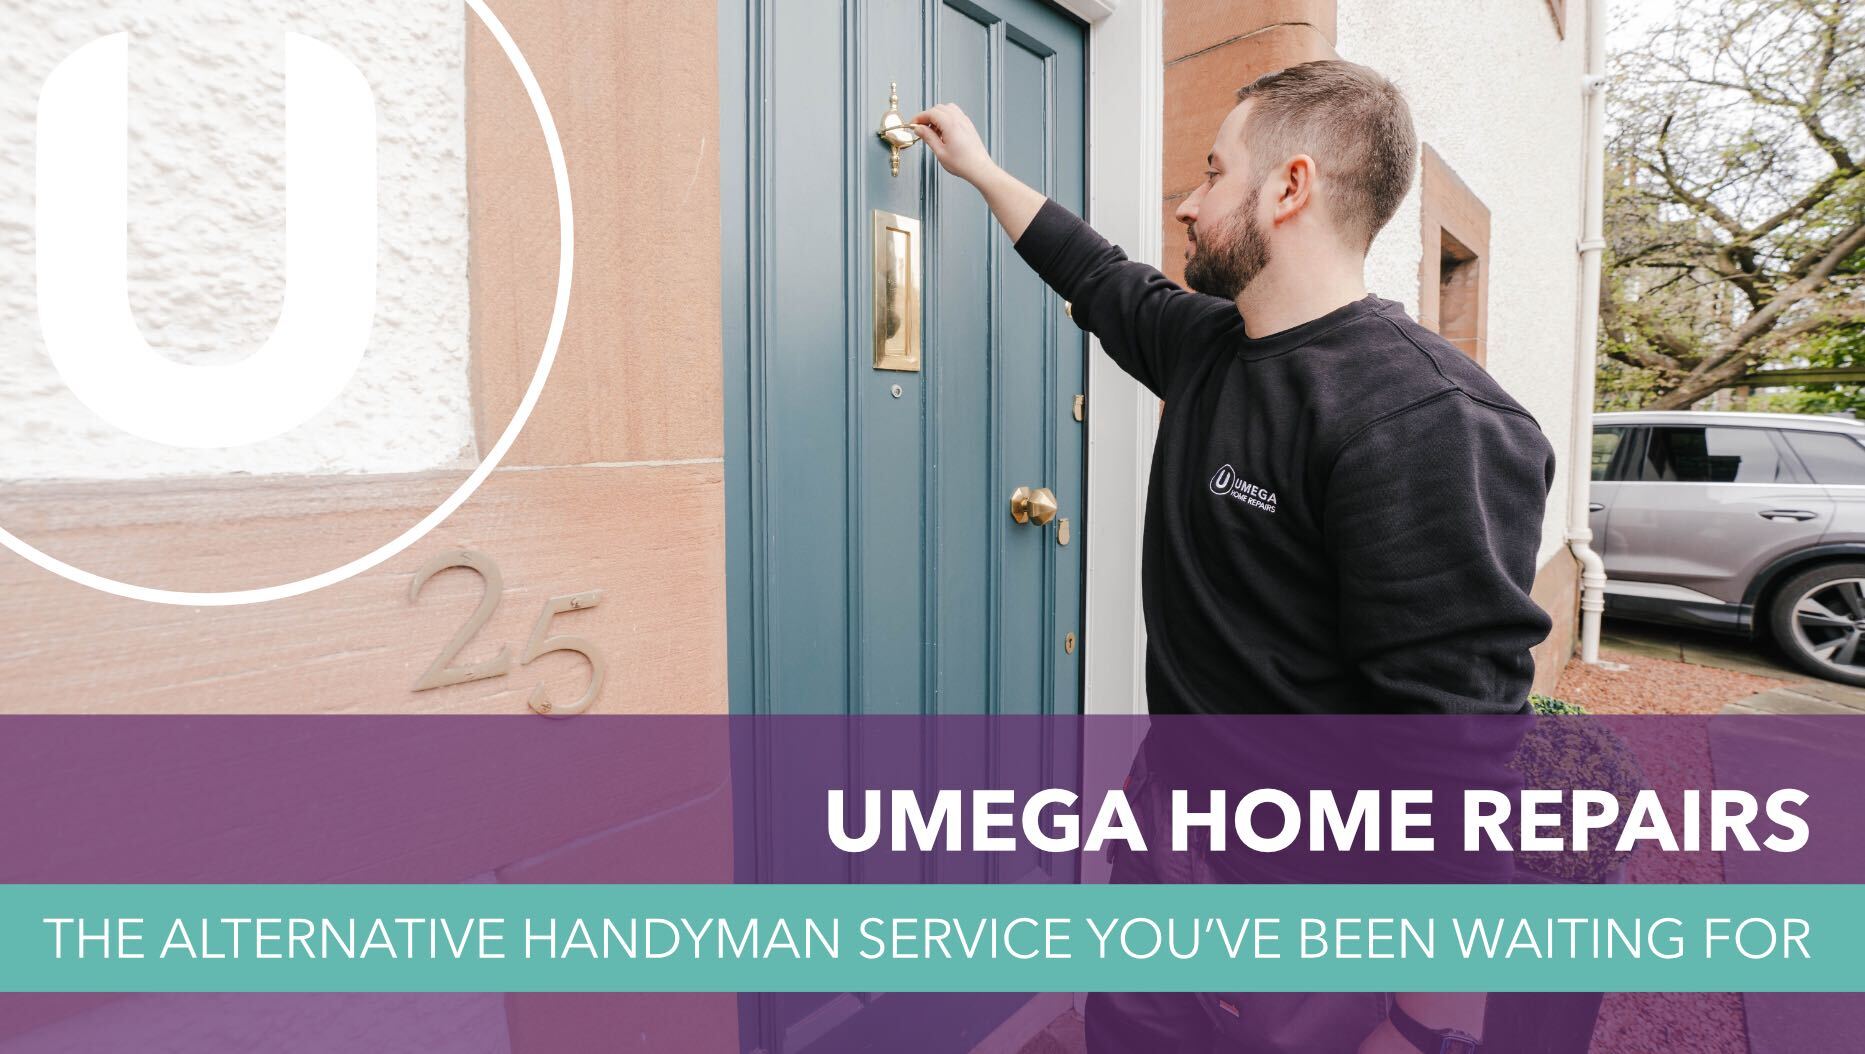 Umega Home Repairs: the alternative handyman service you’ve been waiting for